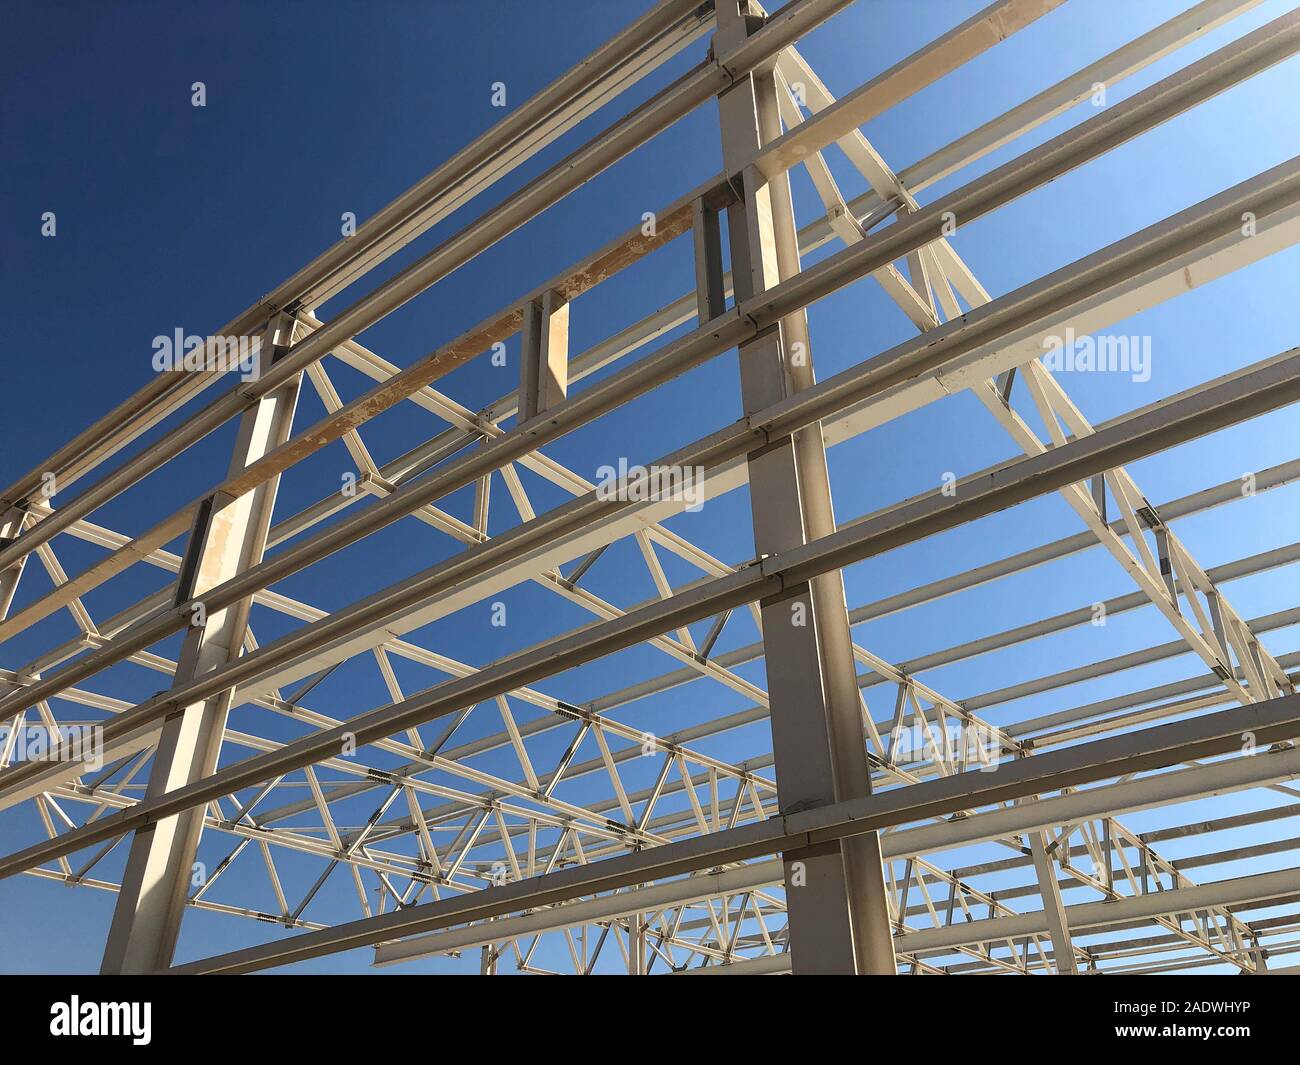 Truss ceiling and metal pillars and girders. Support constructions. Industrial building metal framework. Stock Photo